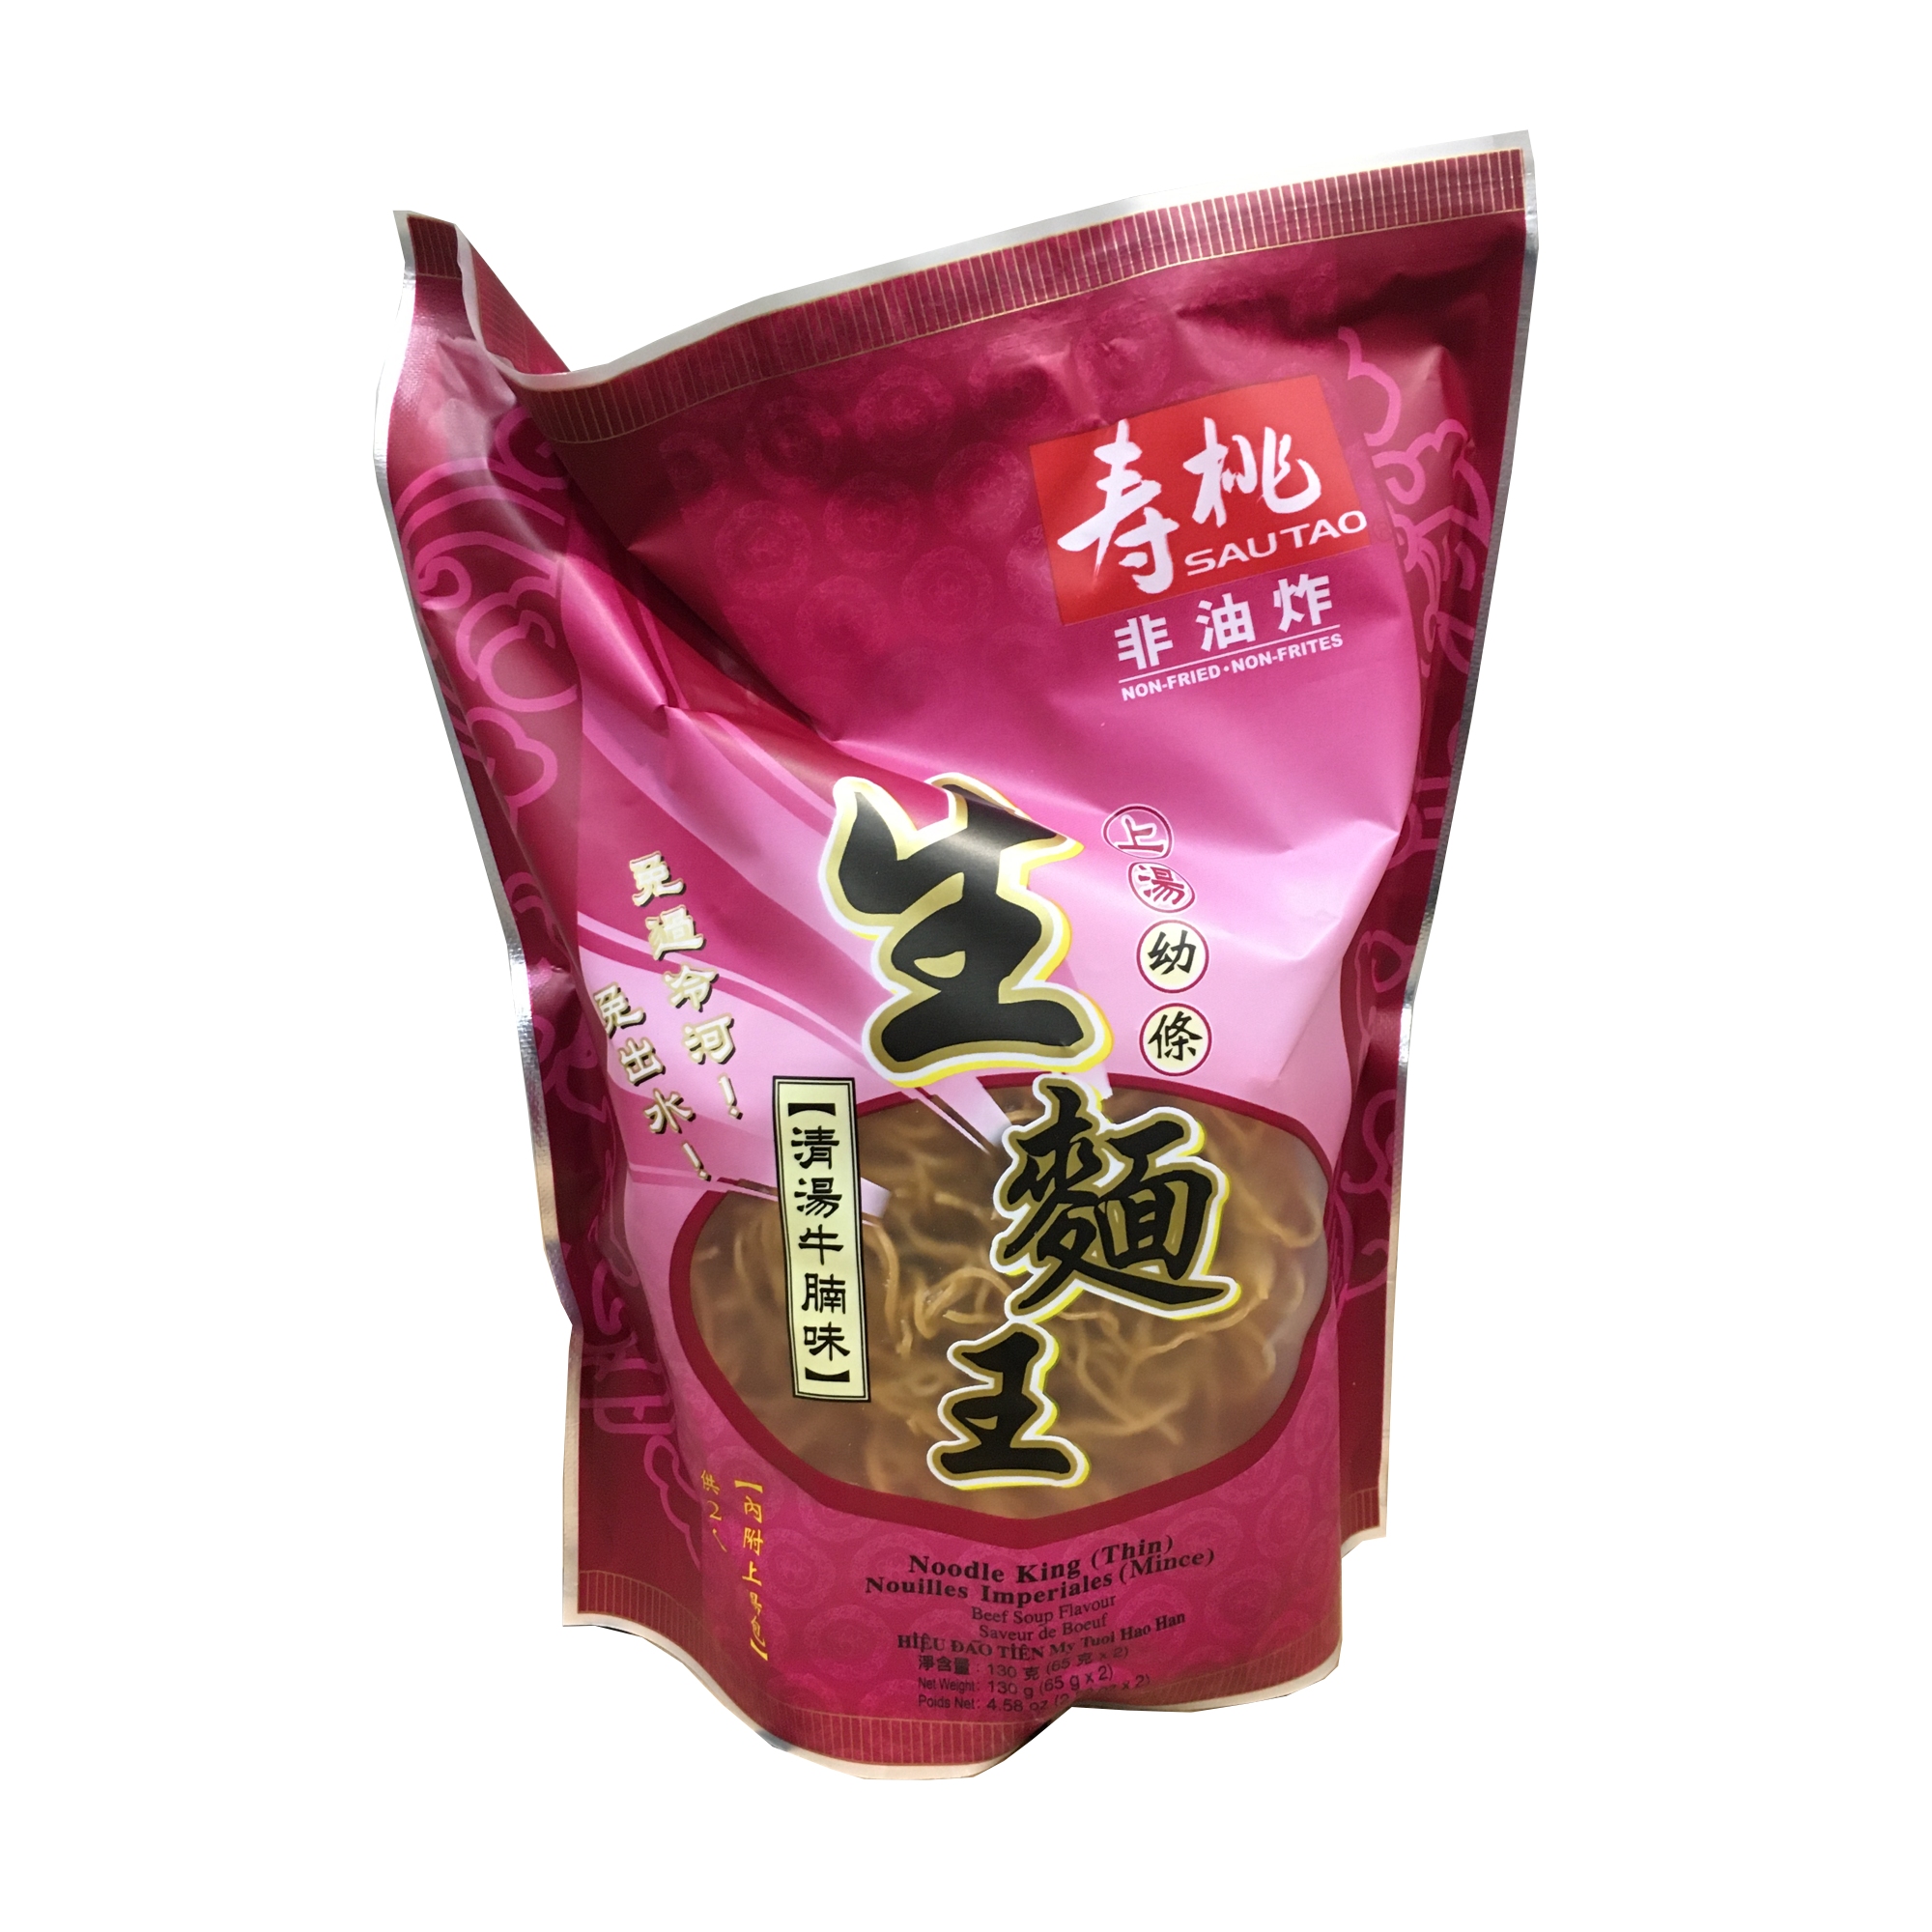 ST NOODLE KING (THIN) - BEEF FLAVOR ND137041